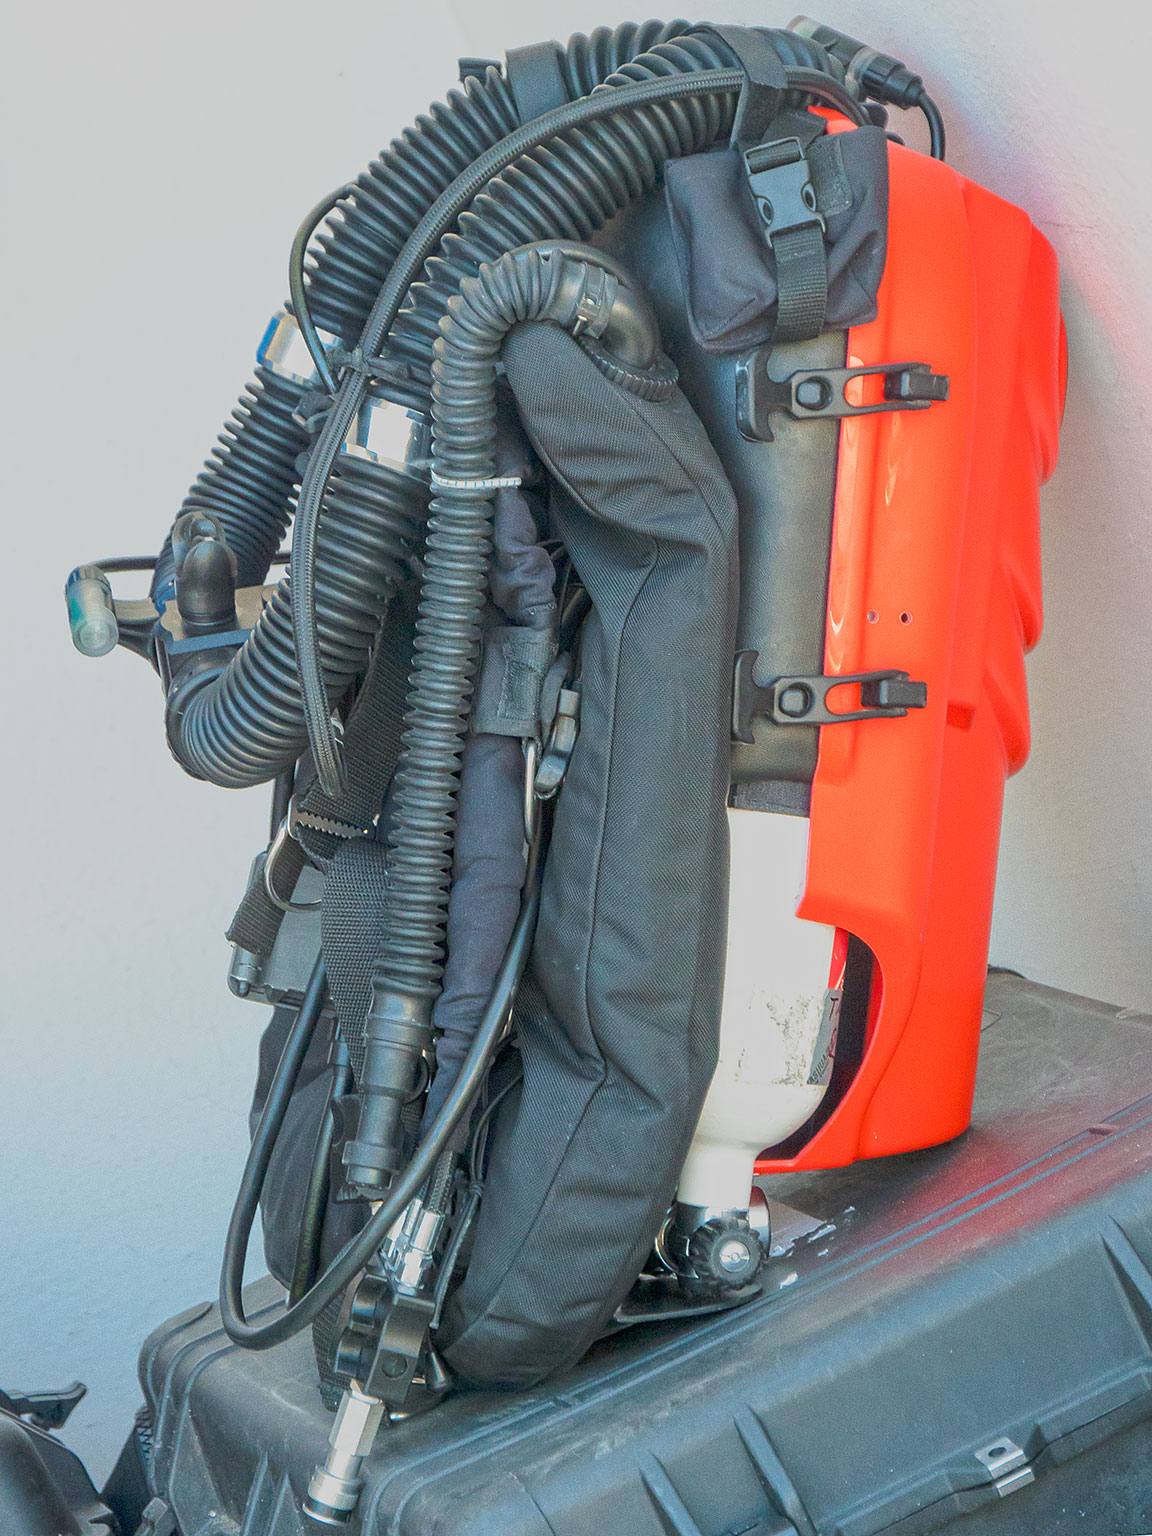 This is the VMS Sentinal rebreather that most of the team is using.